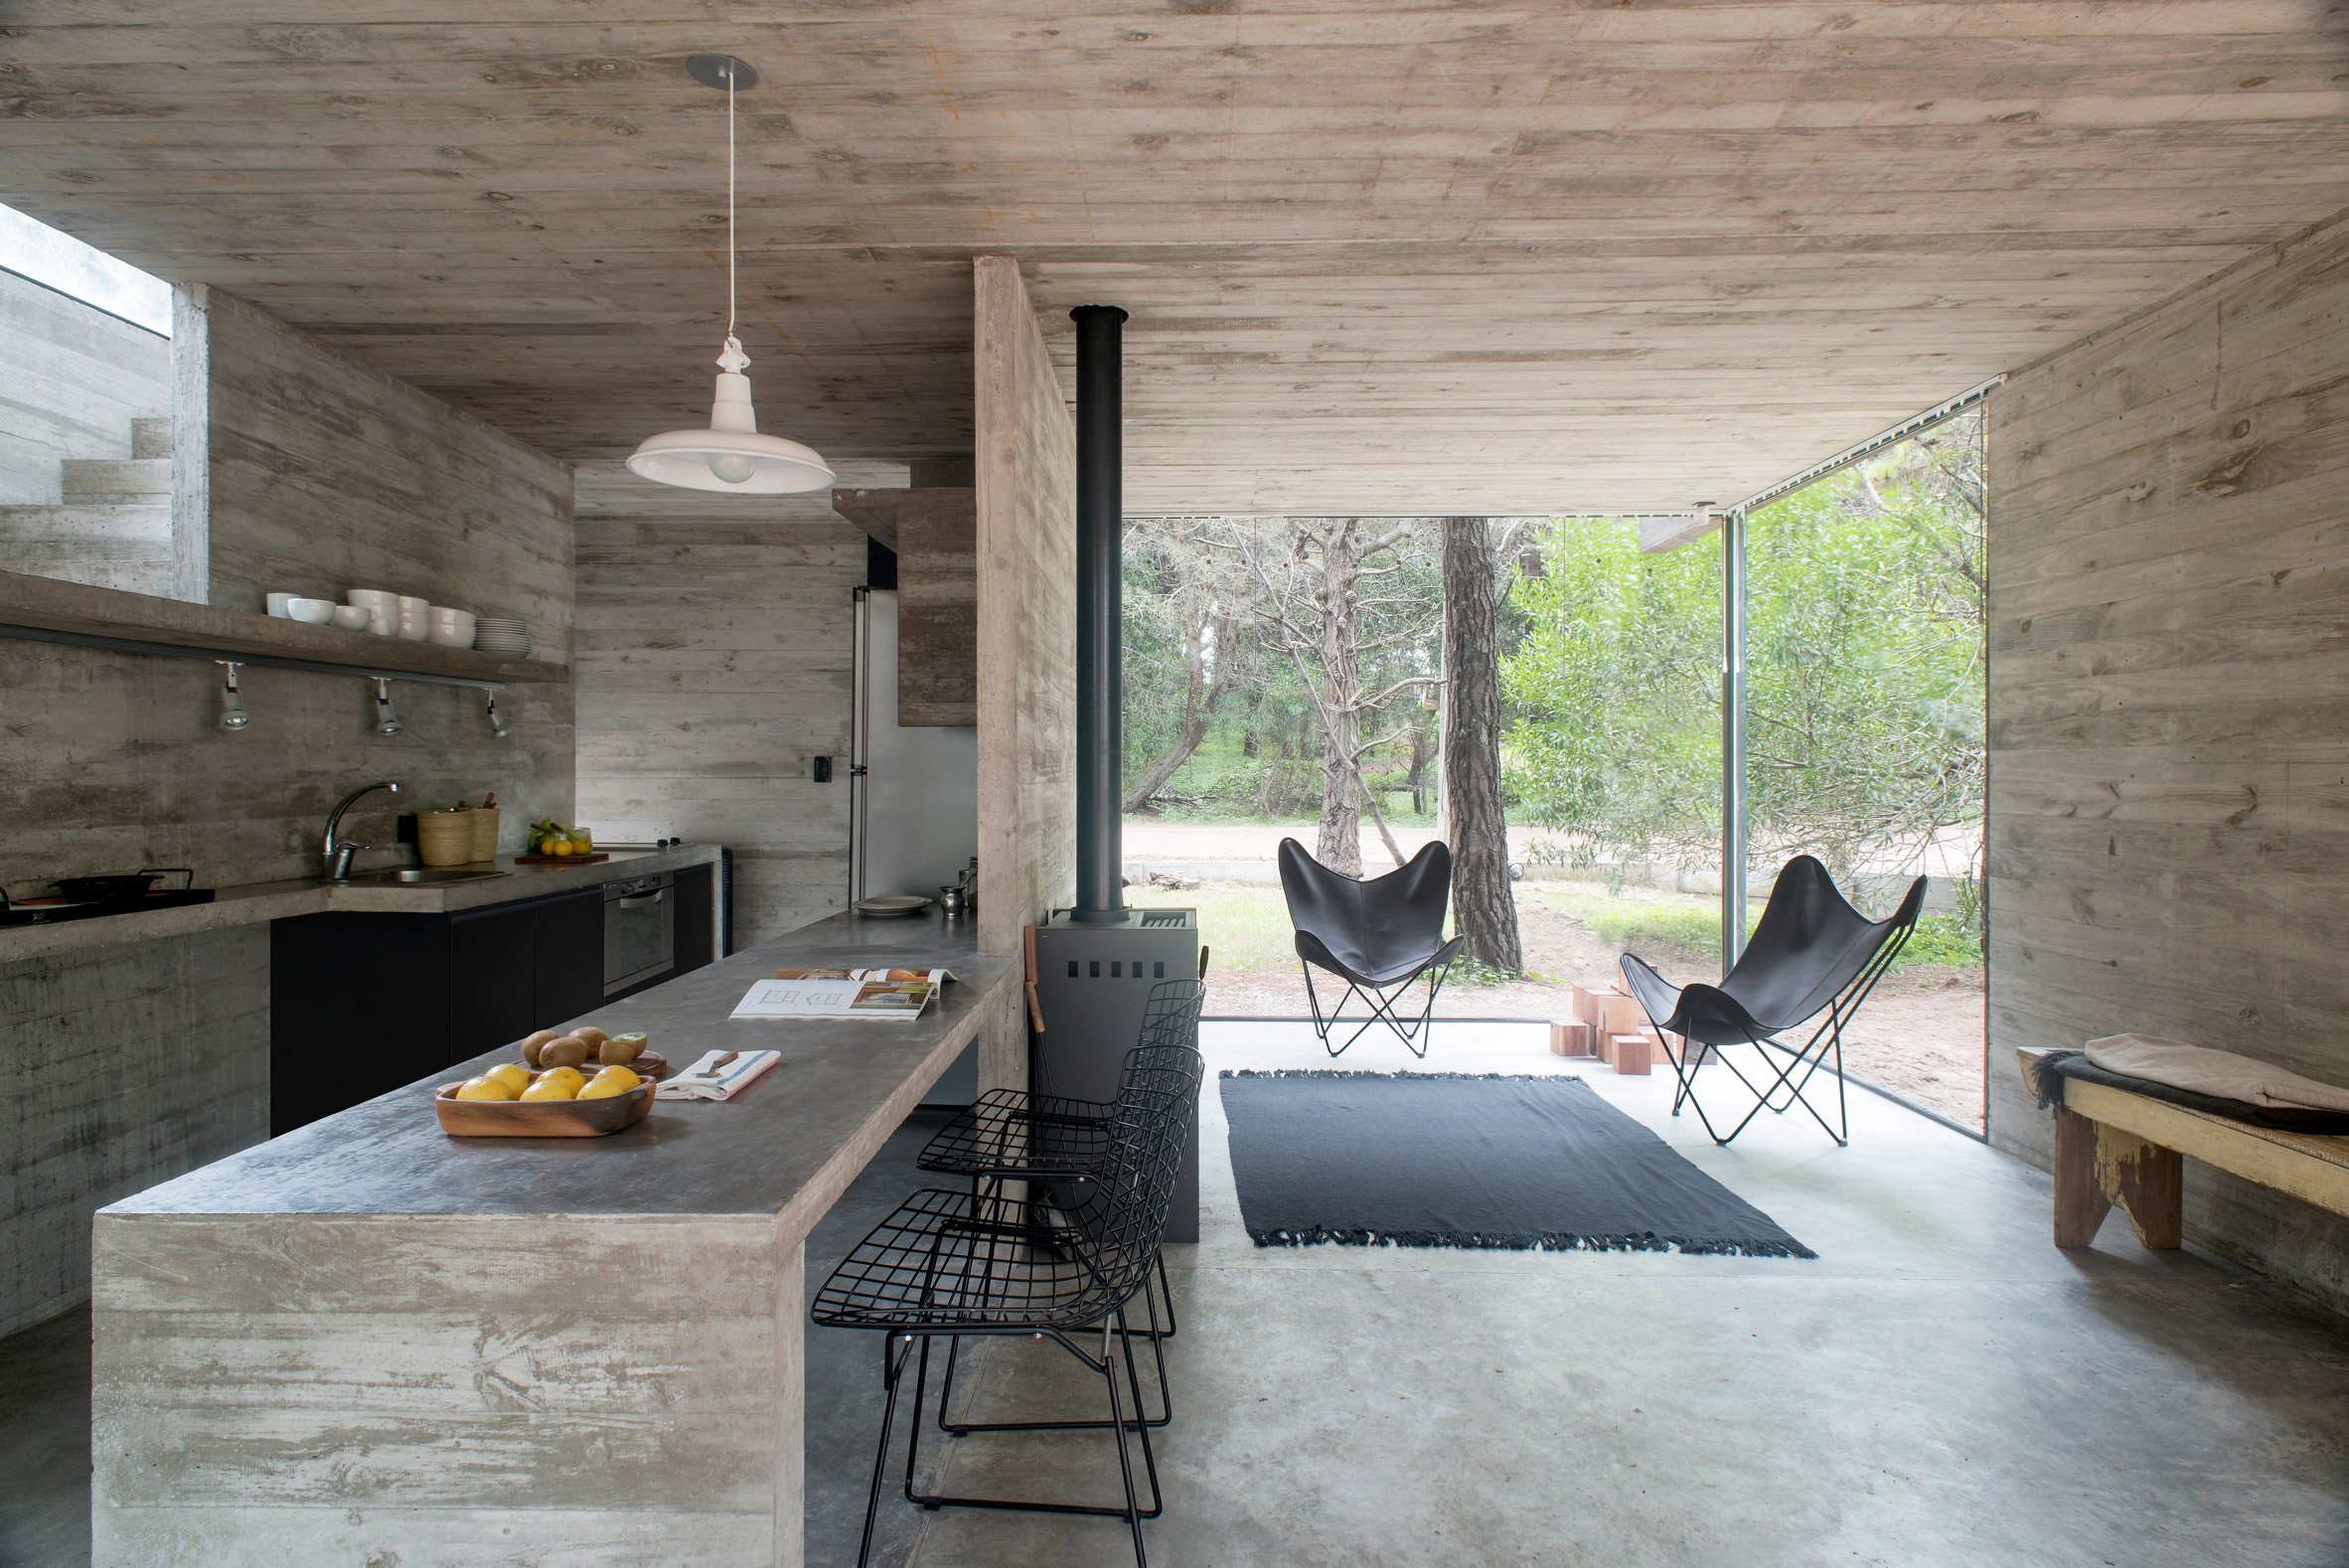 Interior of Casa H3 by Luciano Kruk